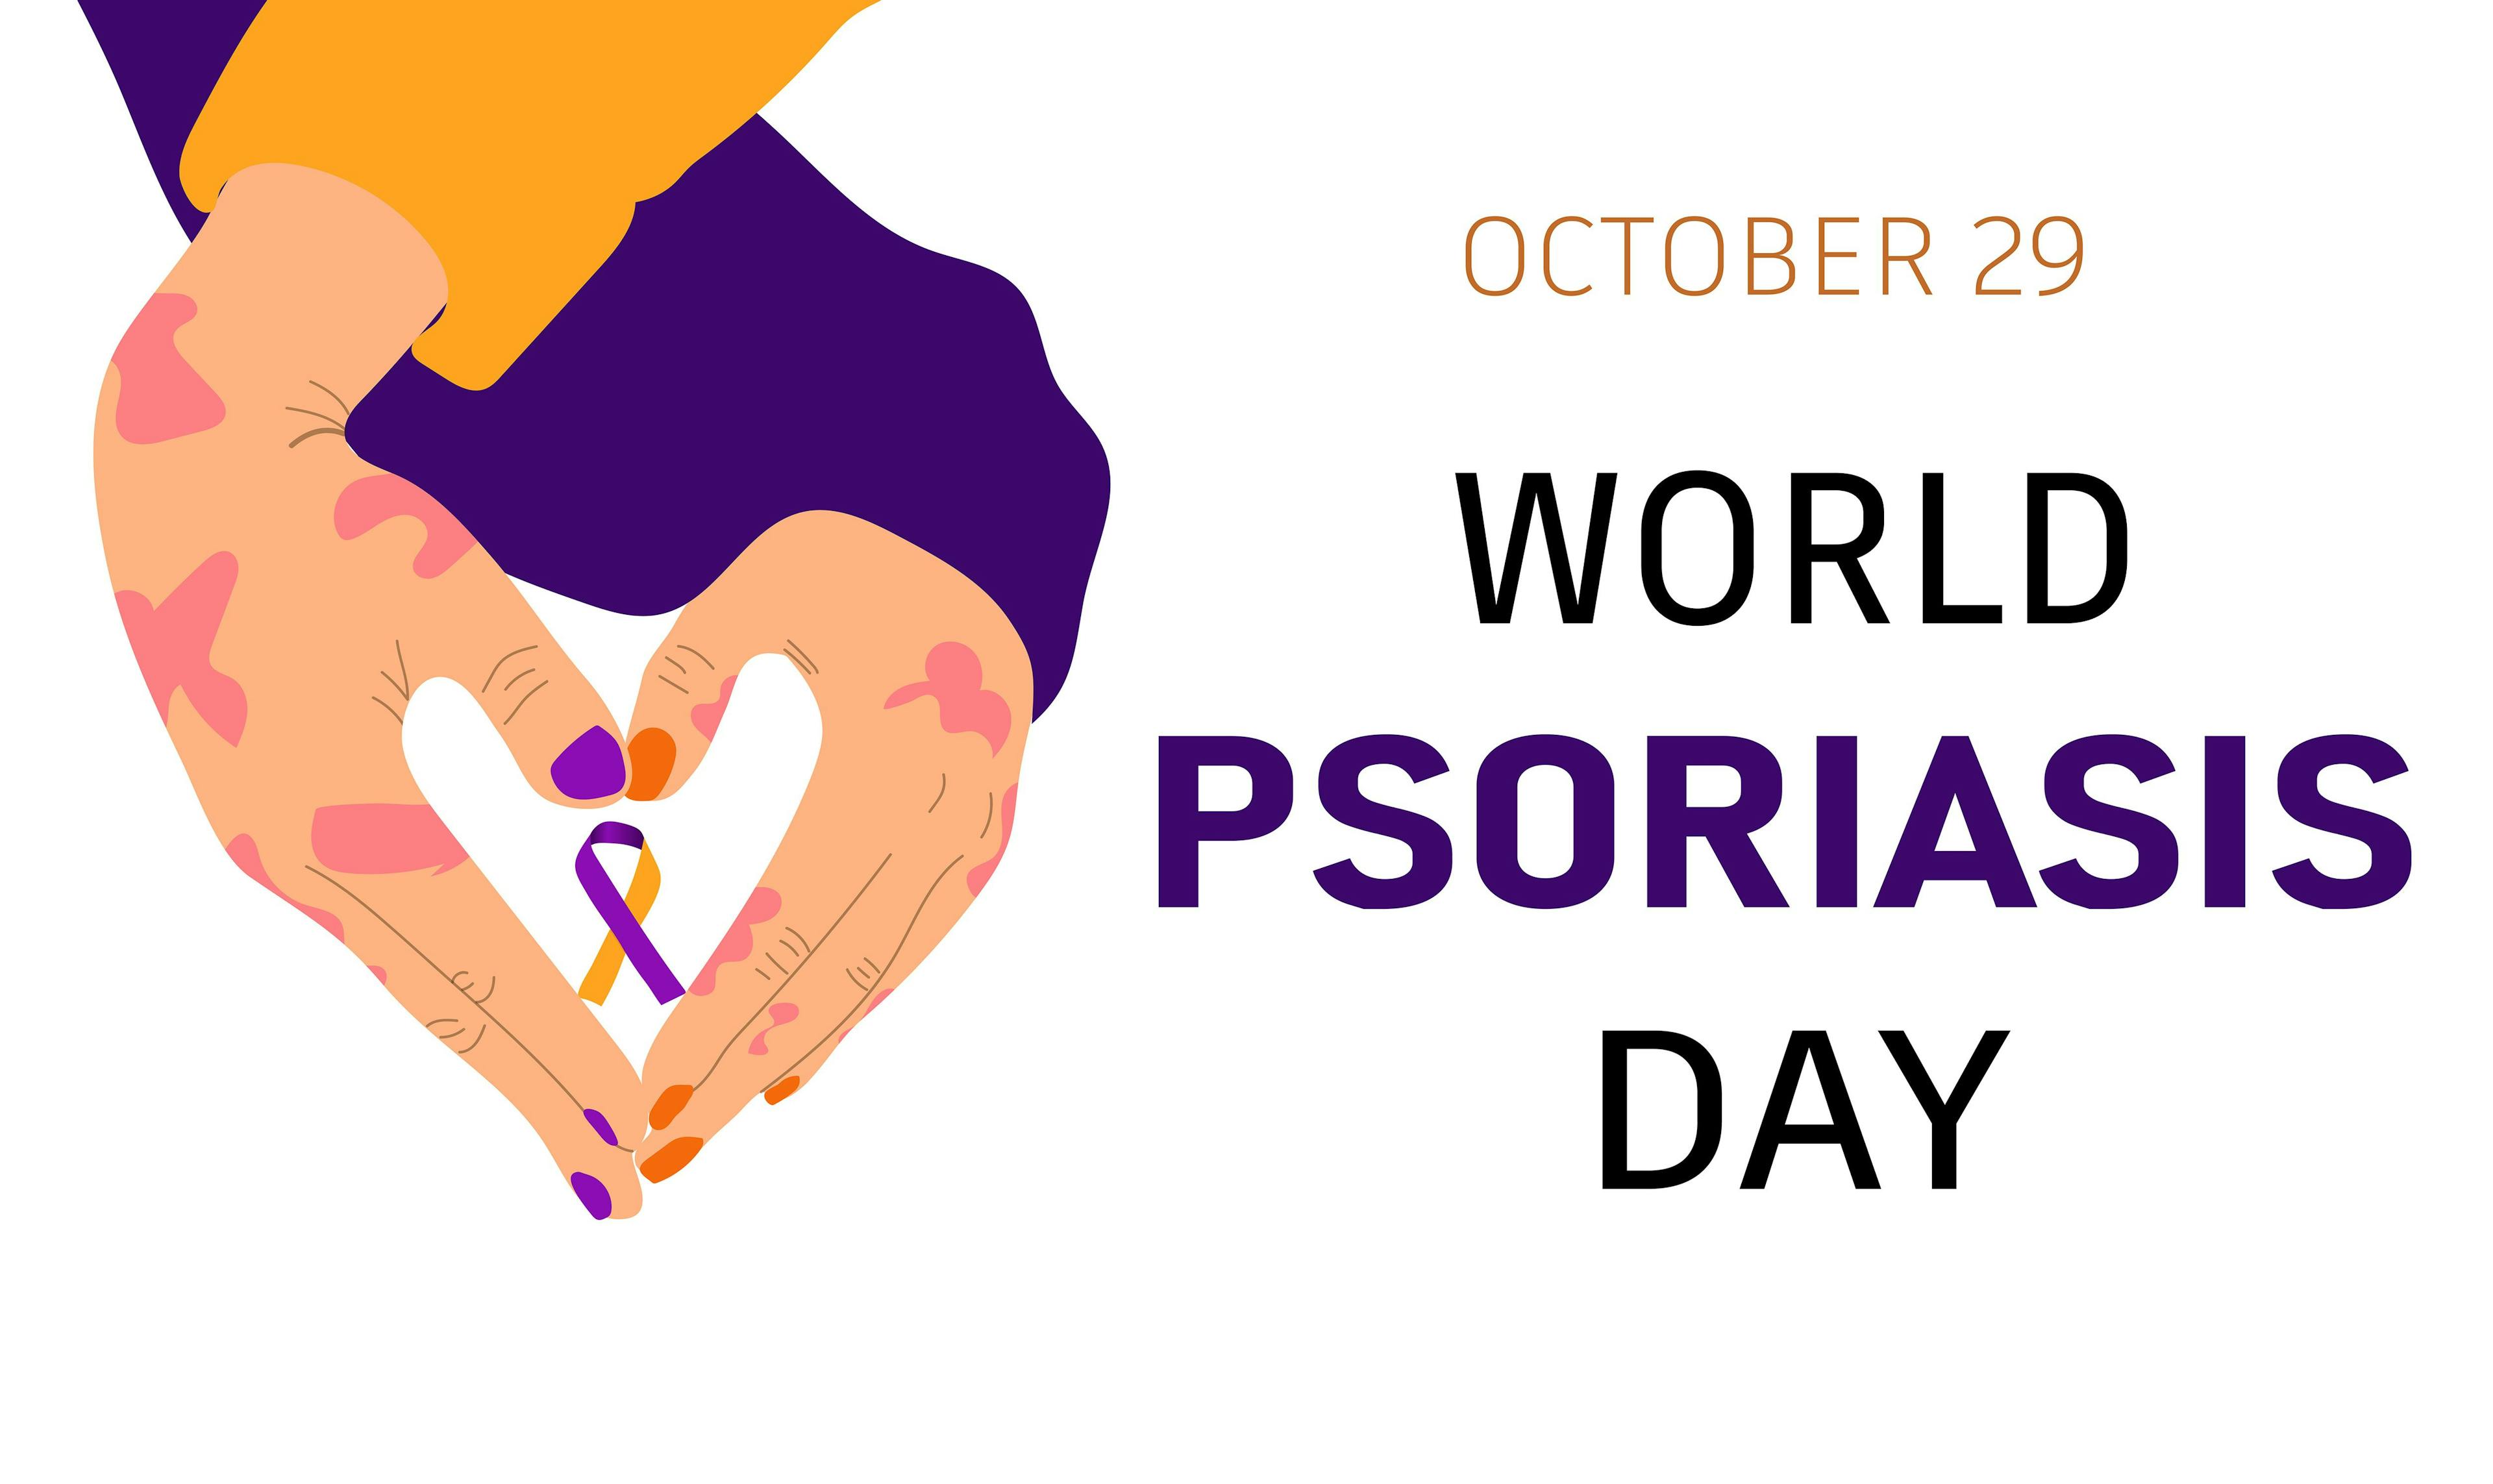 World Psoriasis Day Highlights Advocacy, Awareness, and Education